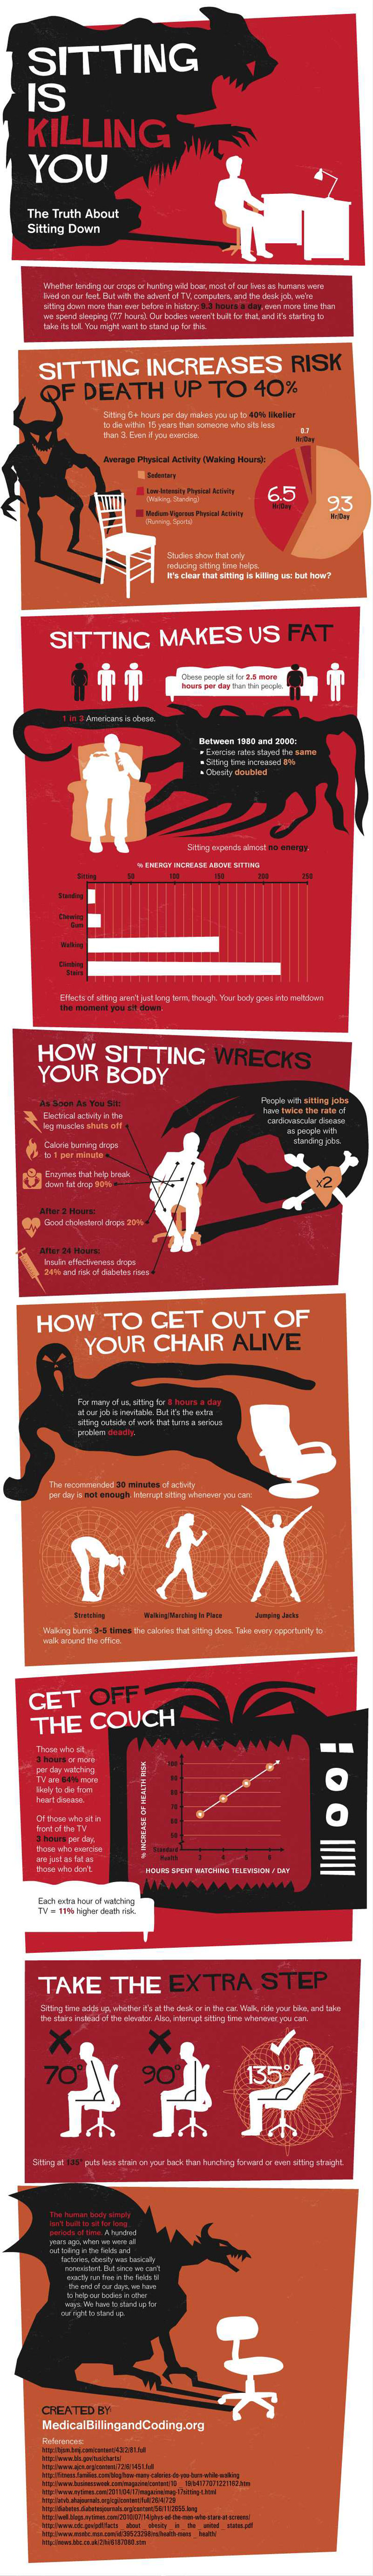 sitting is killing you infographic